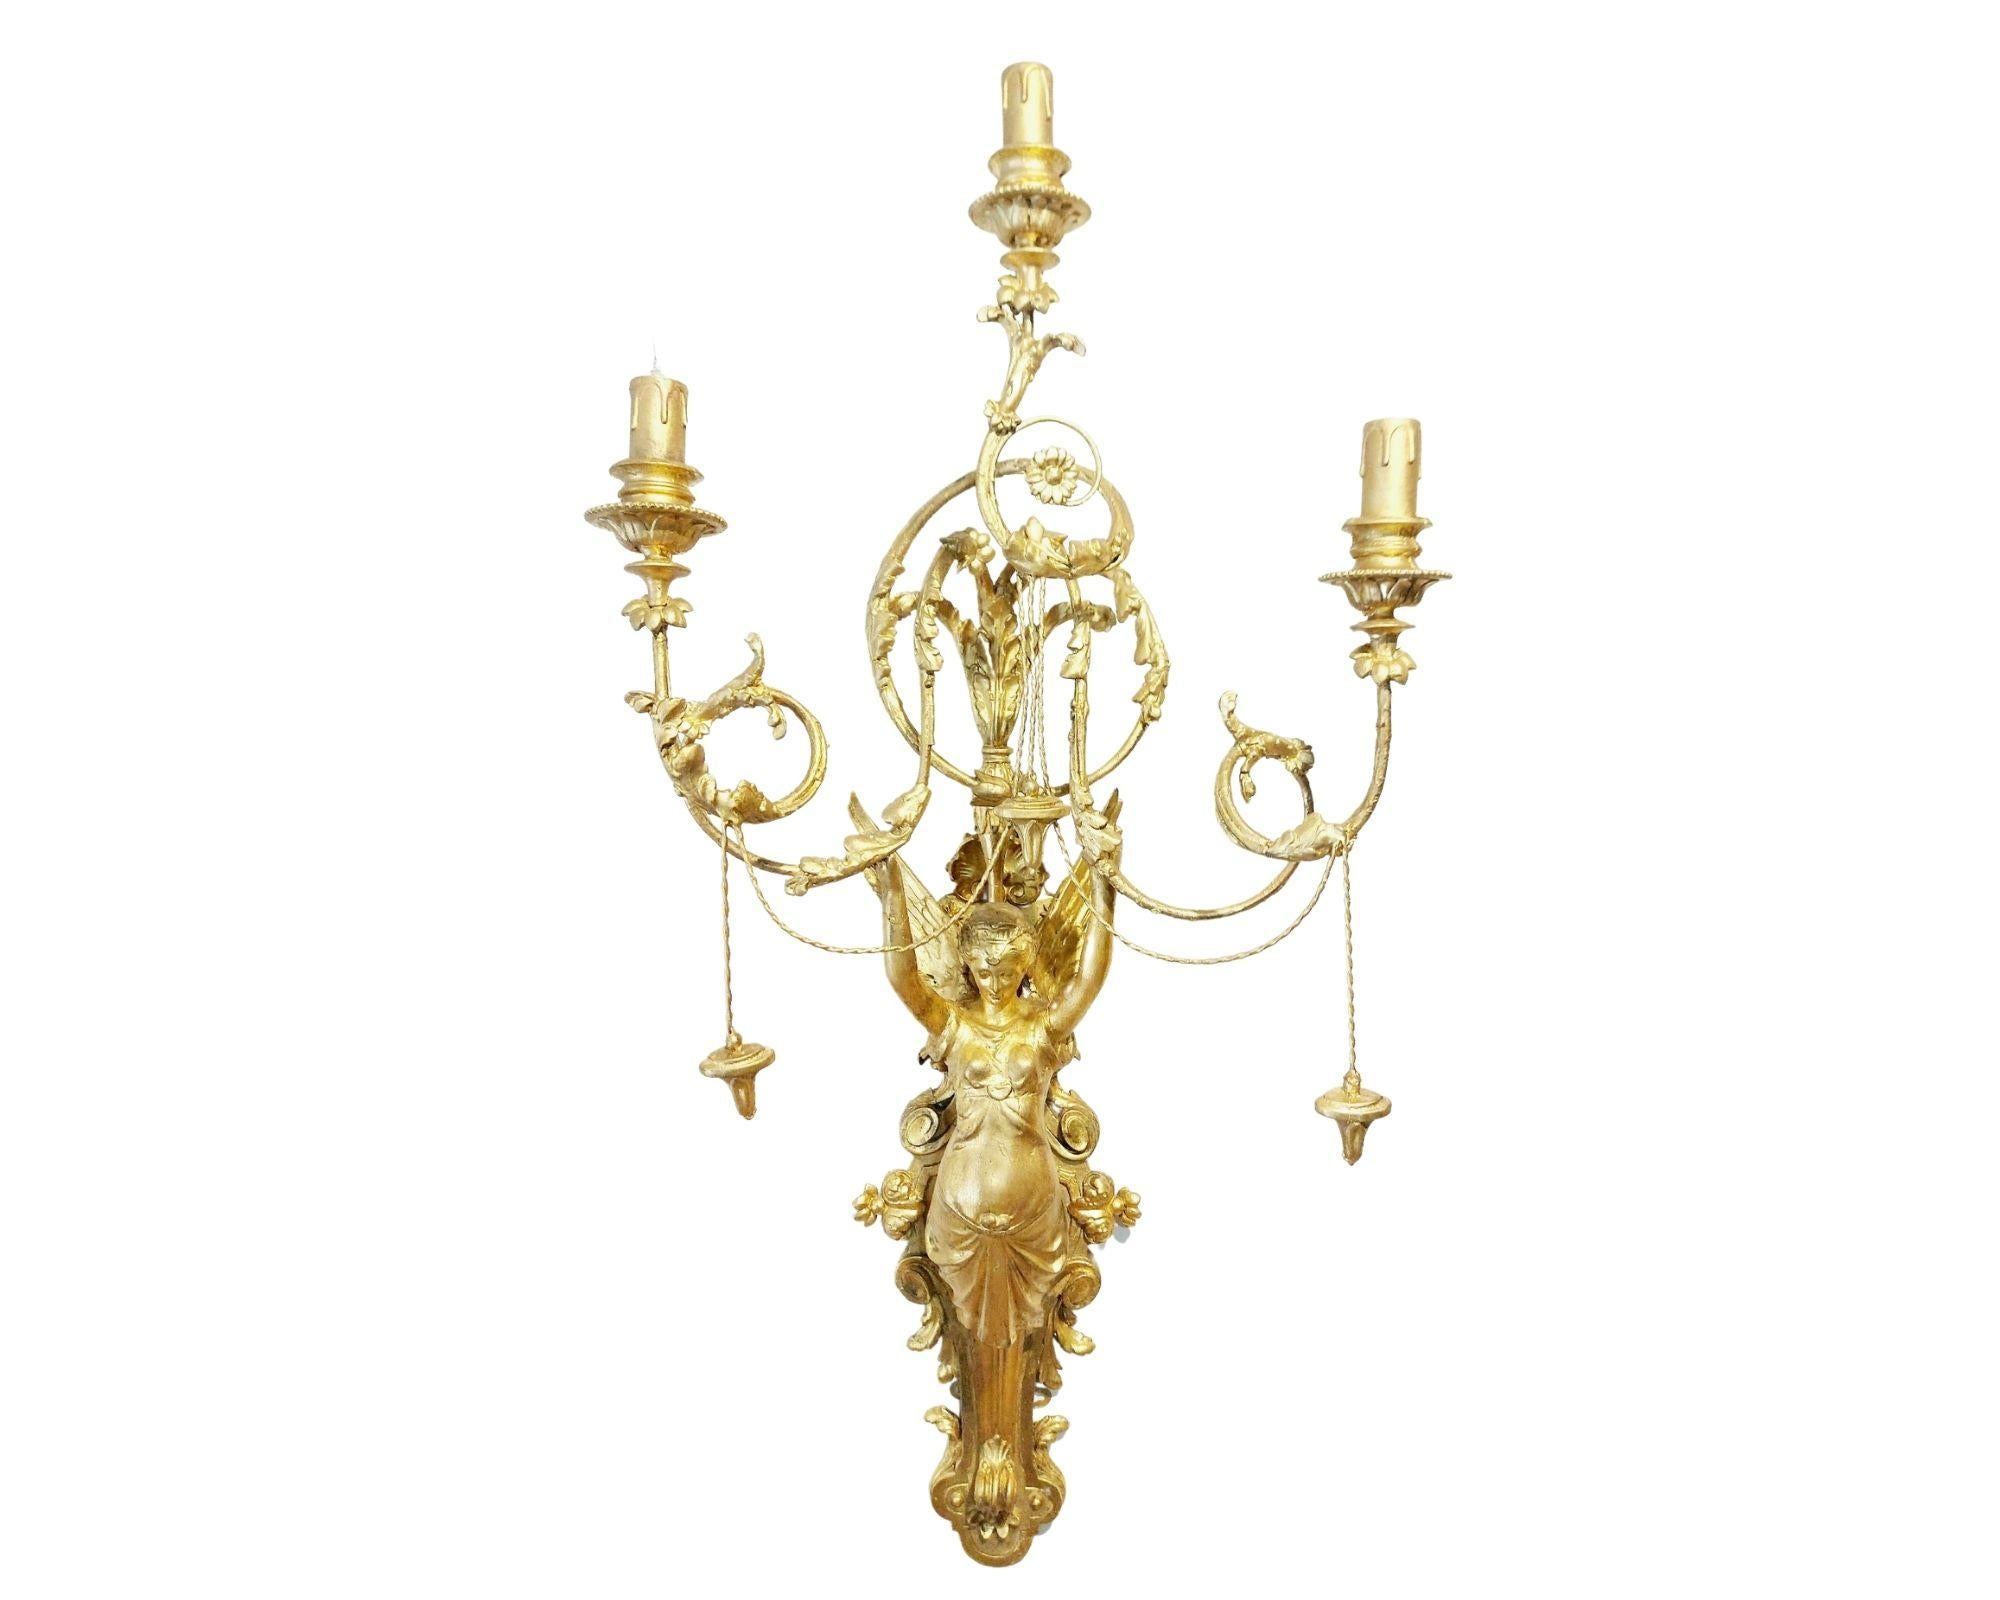 Neoclassical Pair of Italian Neoclassic Empire Gilt Wood Wall Sconces For Sale